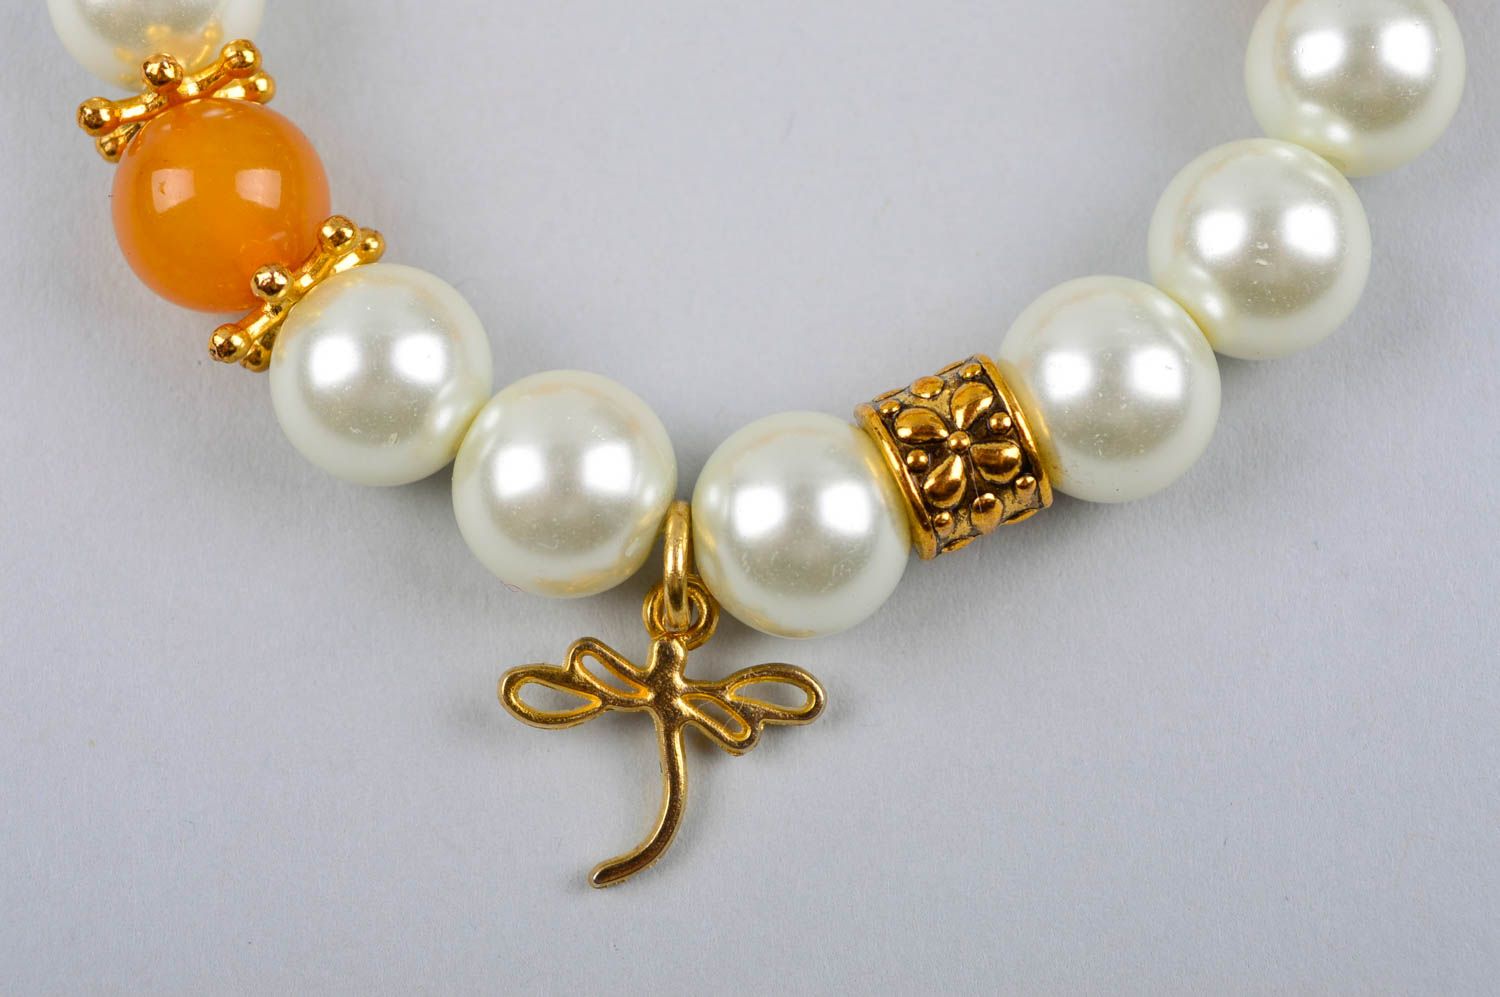 Handcrafted bracelet amber and white beads fashion designer wrist accessory photo 5